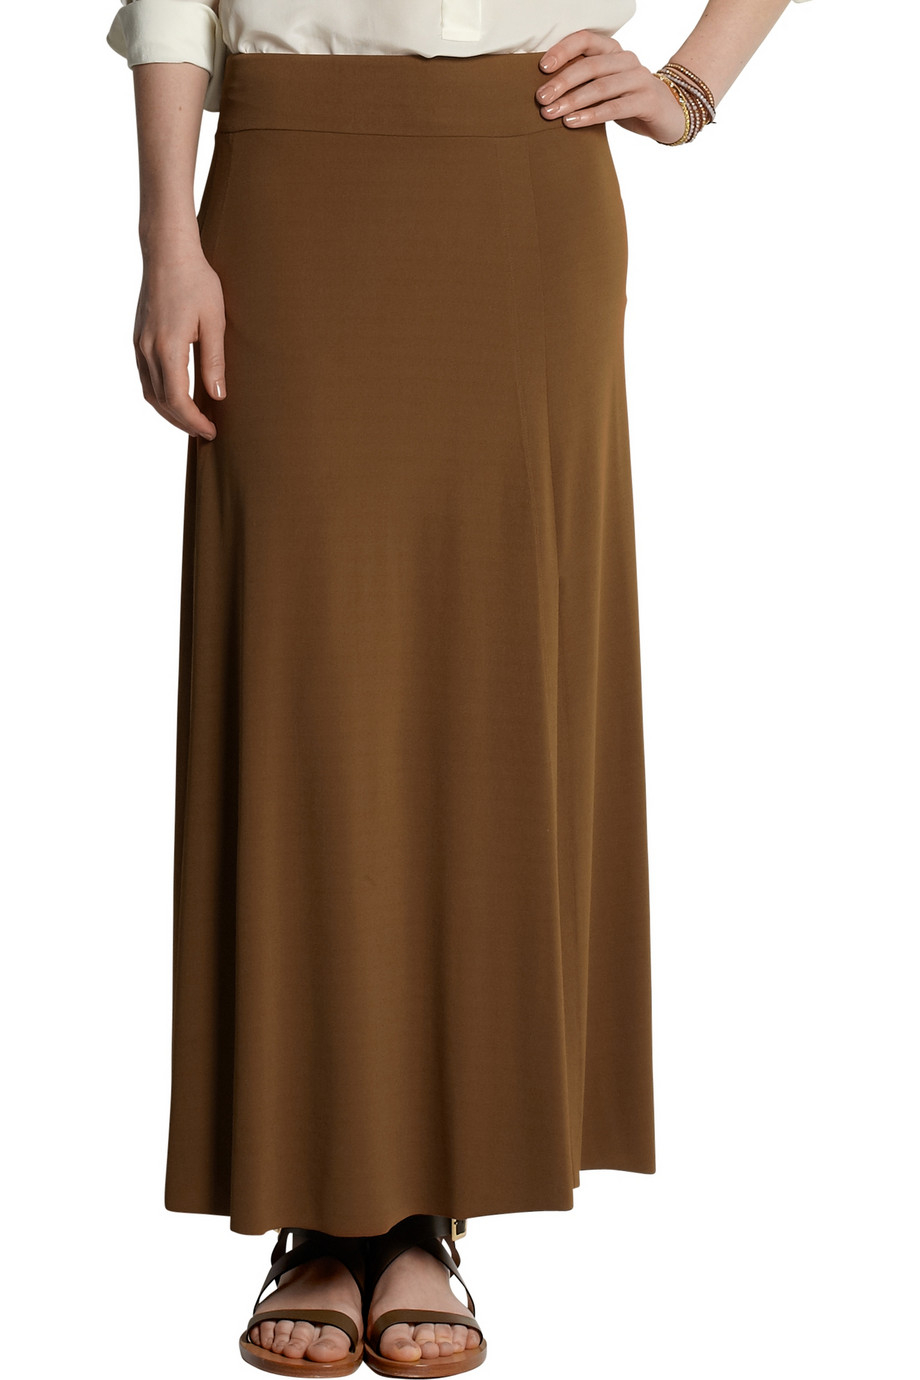 Donna Karan Synthetic Stretch-jersey Maxi Skirt in Tan (Brown) - Lyst